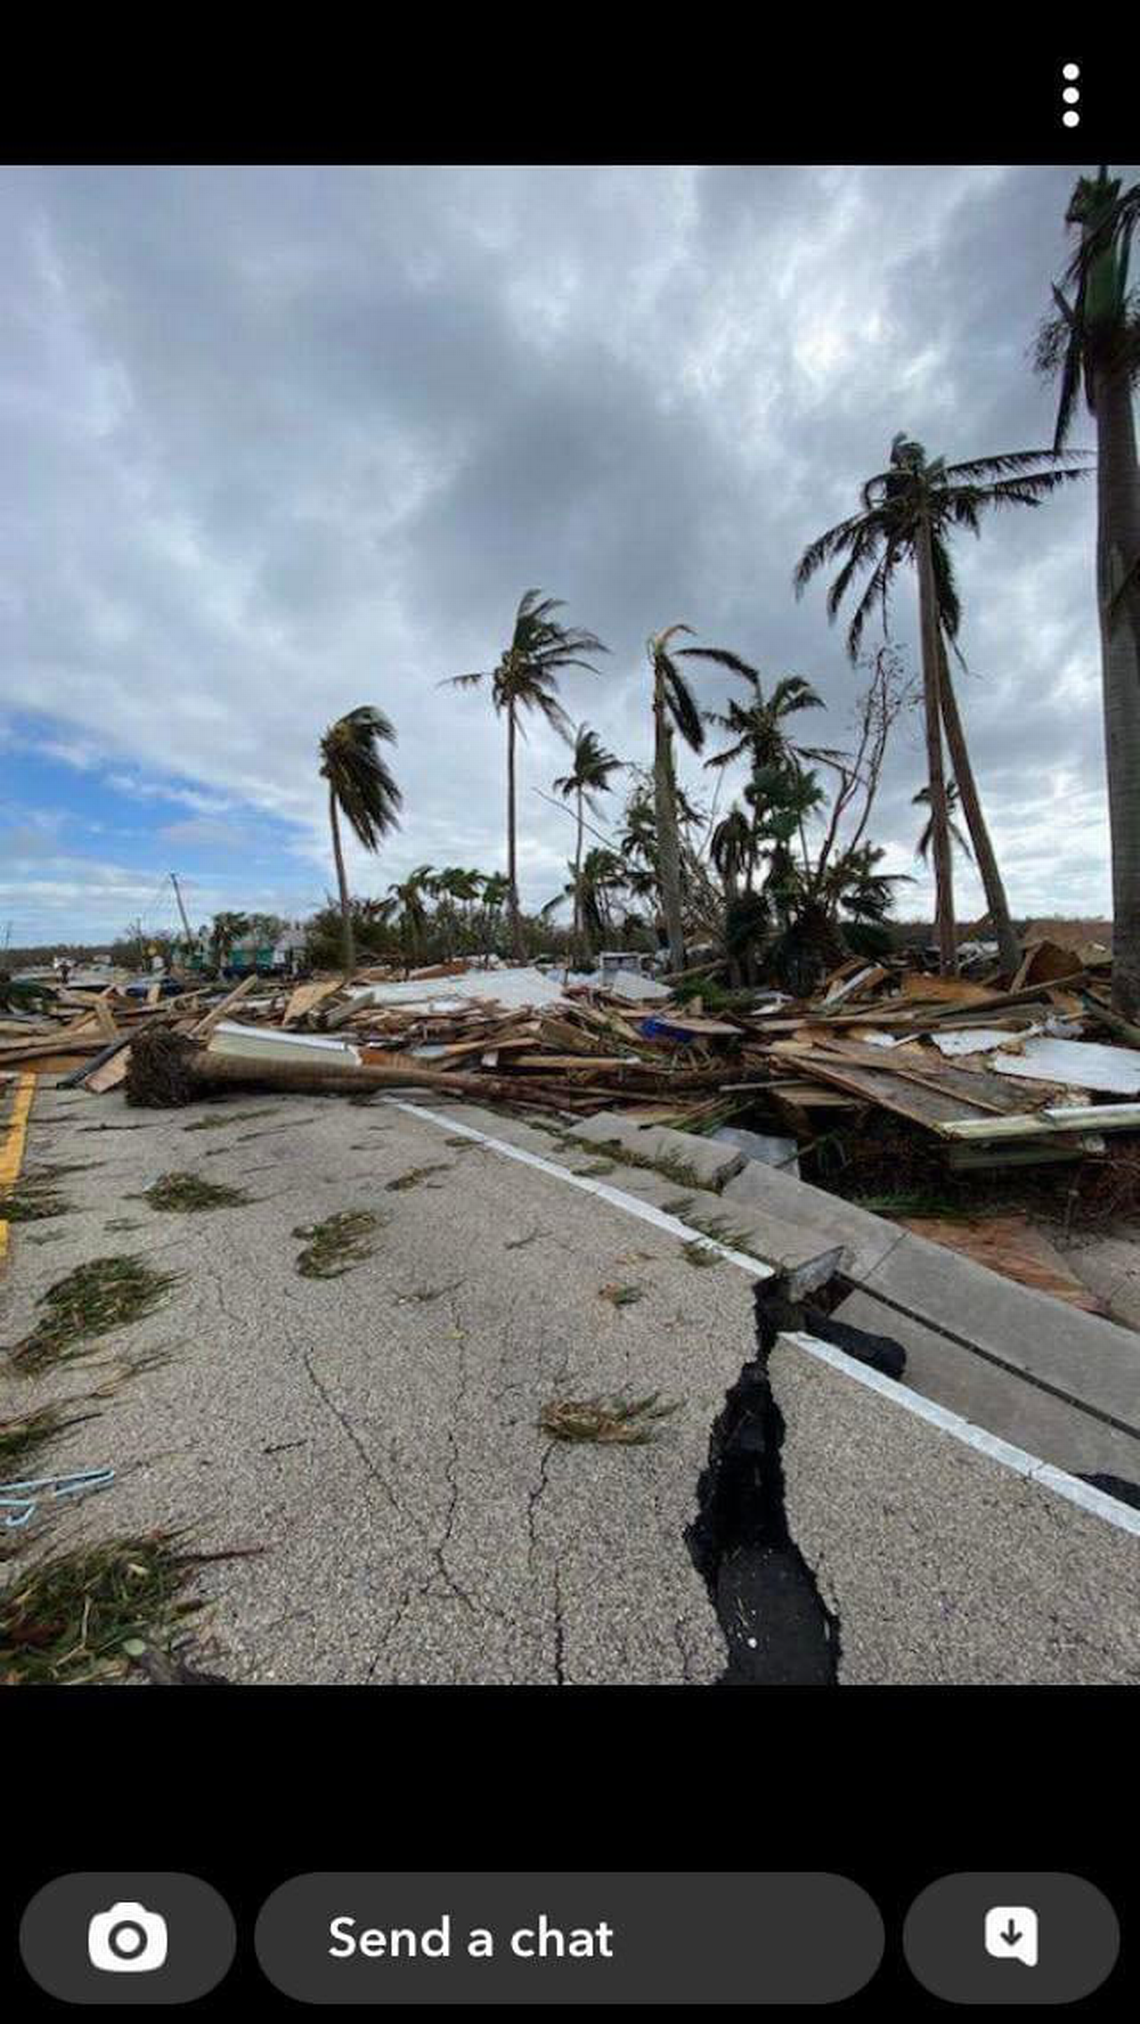 Hurricane Ian destroyed much of Matlacha, a charming fishing and artists’ community off Pine Island in southwest Florida. The photo was taken Thursday morning, Sept. 29, 2022, after the massive storm hit the area on Wednesday afternoon.